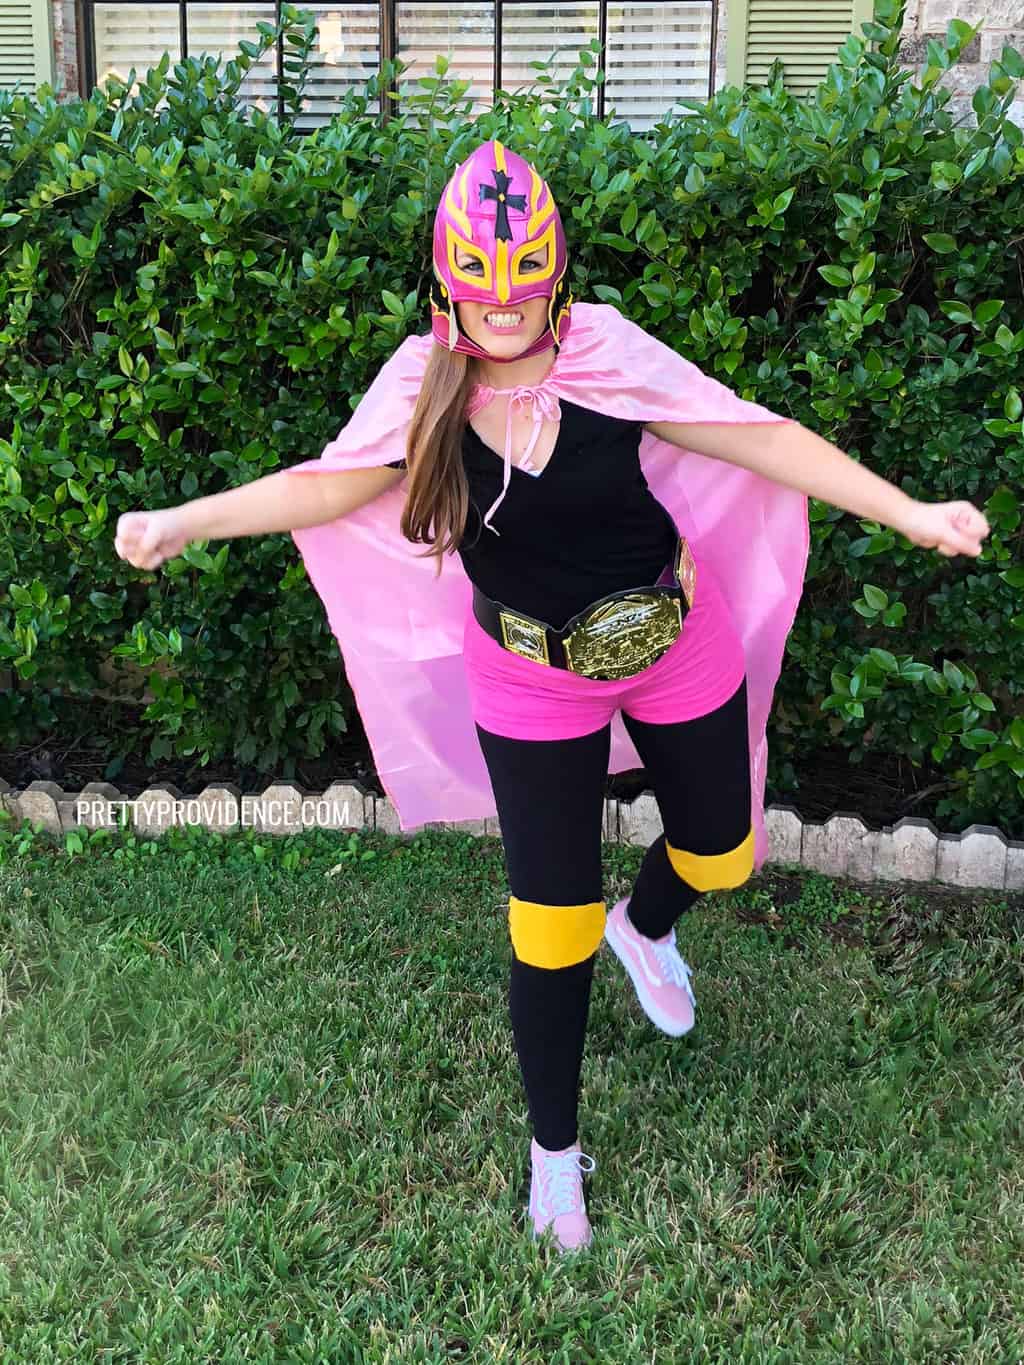 Woman wearing a lucha libre costume with a pink and yellow luchador mask, a pink cape, pink shorts, black wrestling belt and yellow knee pads.